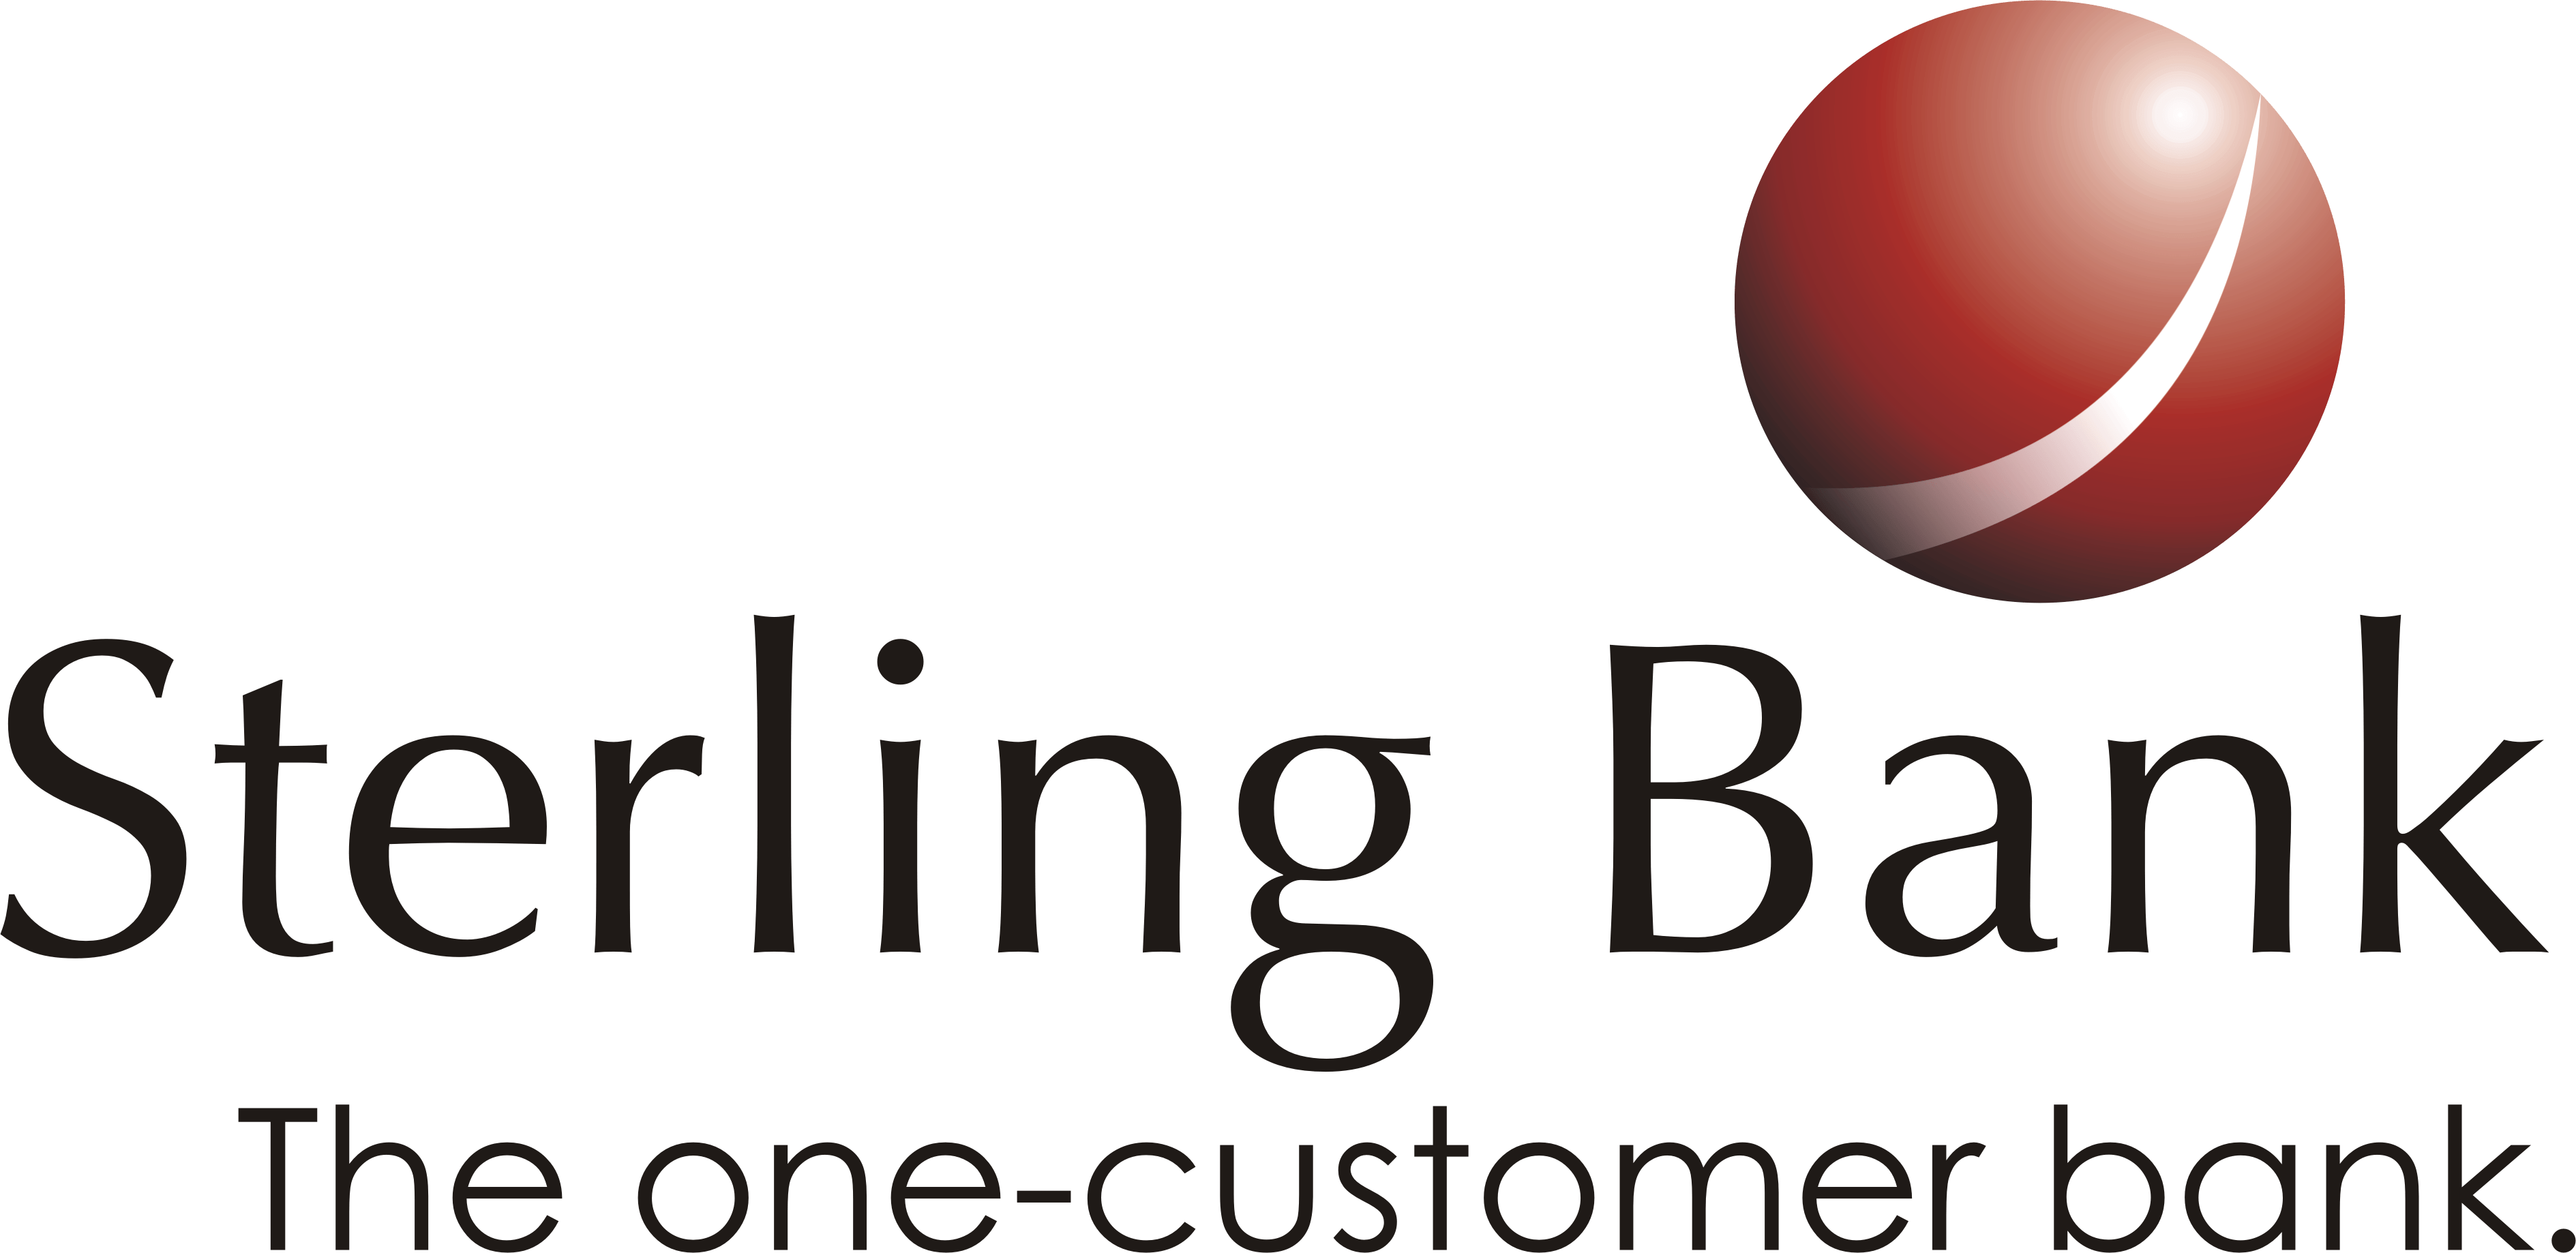 Sterling Logo - File:Sterling bank logo wk.png - Wikimedia Commons